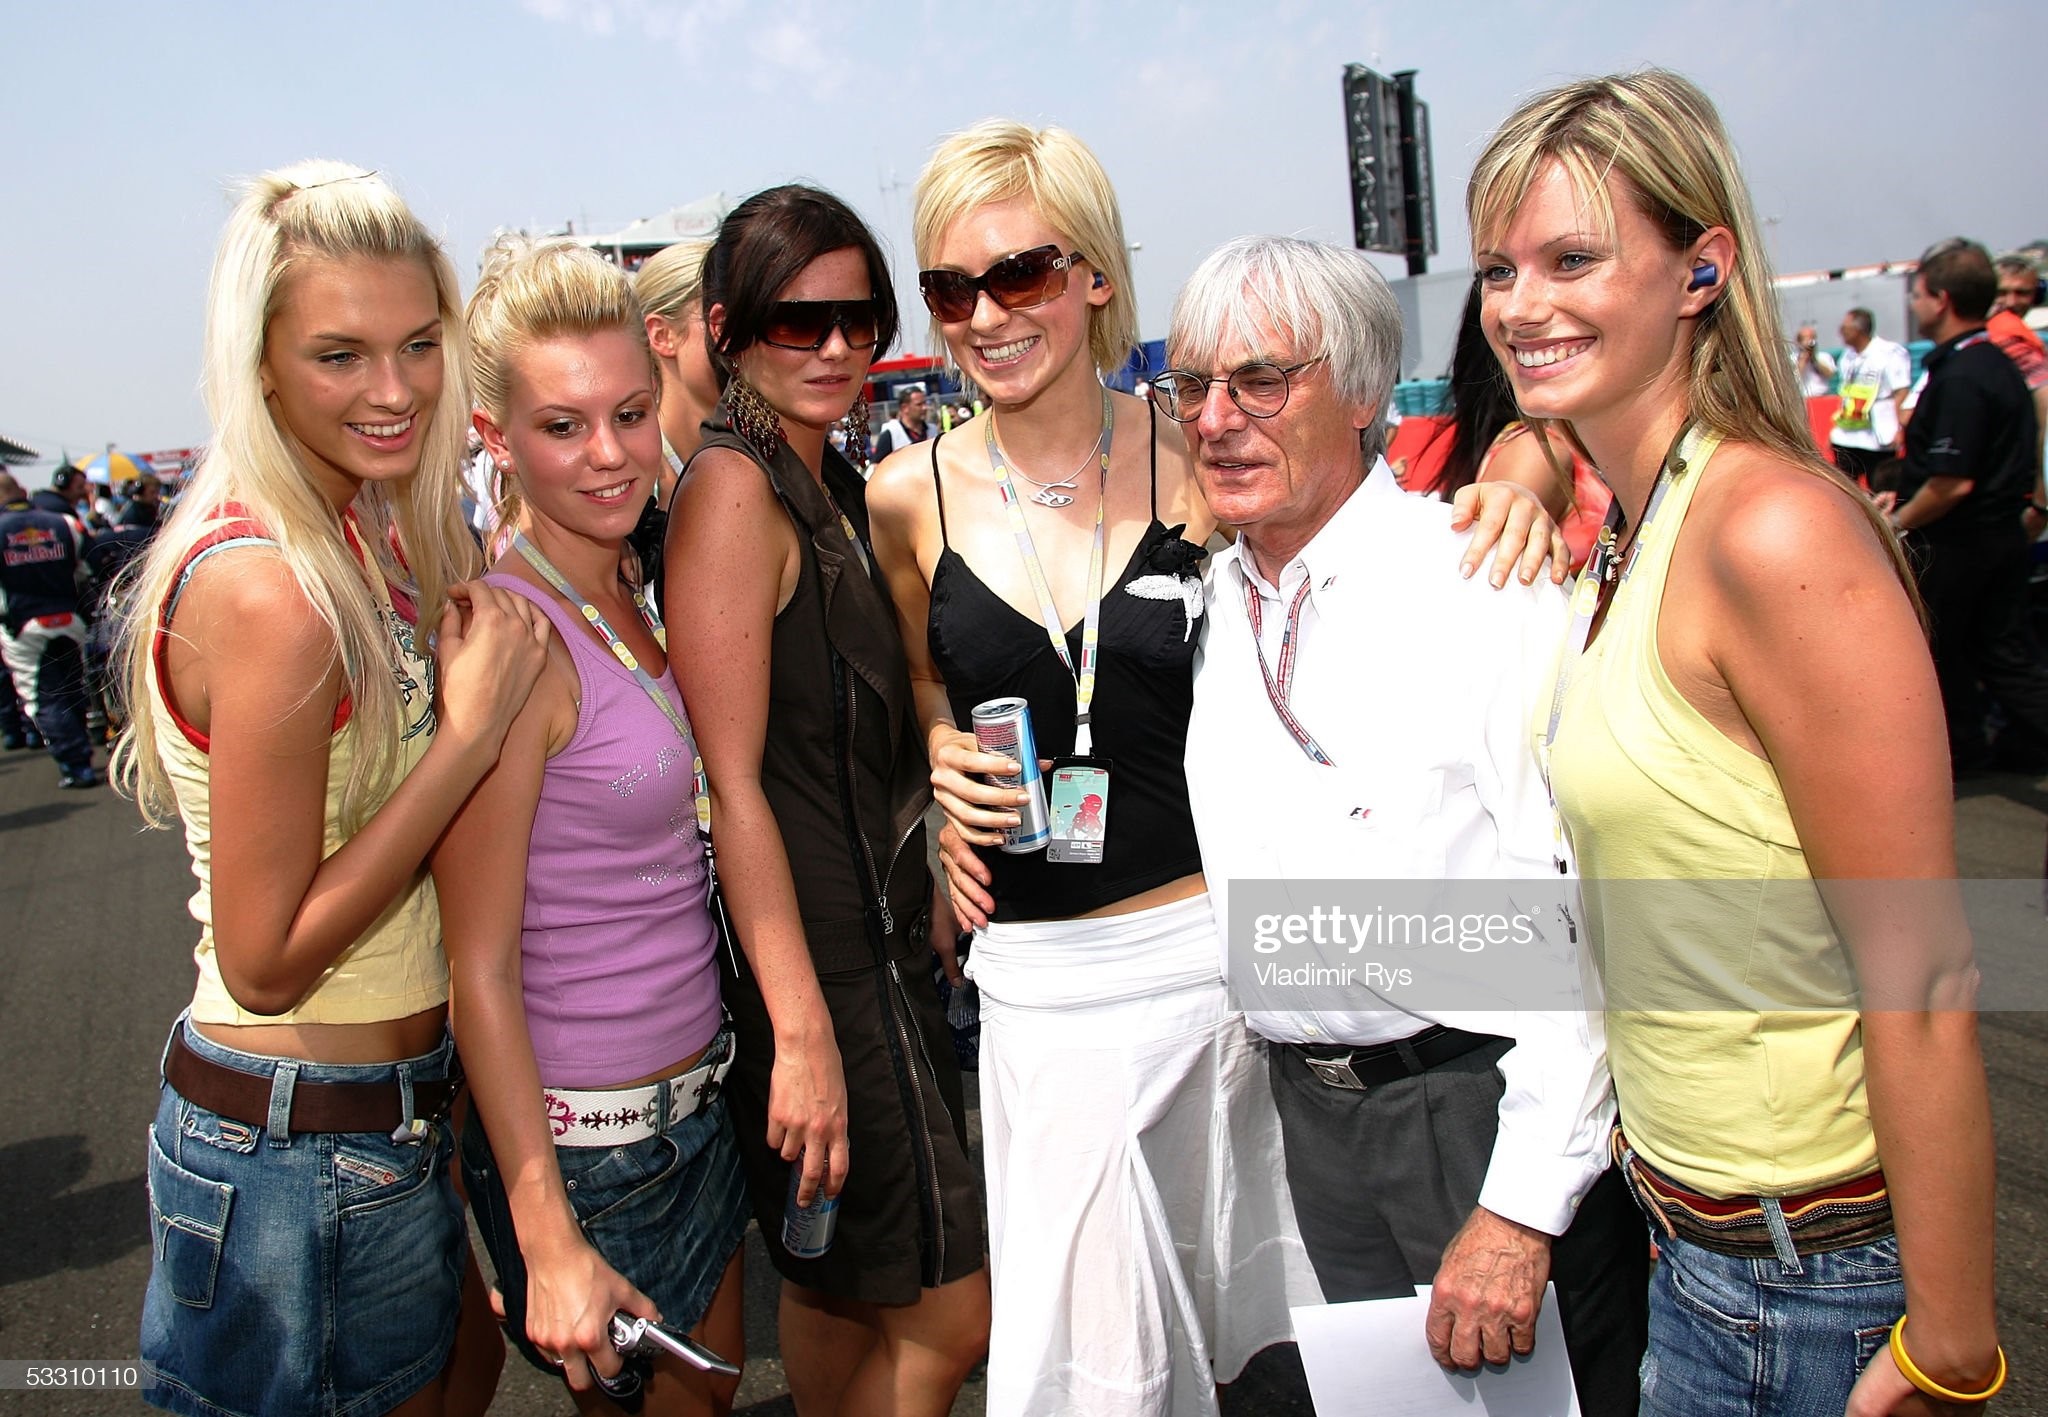 Bernie Ecclestone pose on the starting grid with the girls for the photographers before the Hungarian F1 Grand Prix on July 31, 2005 in Budapest, Hungary. 